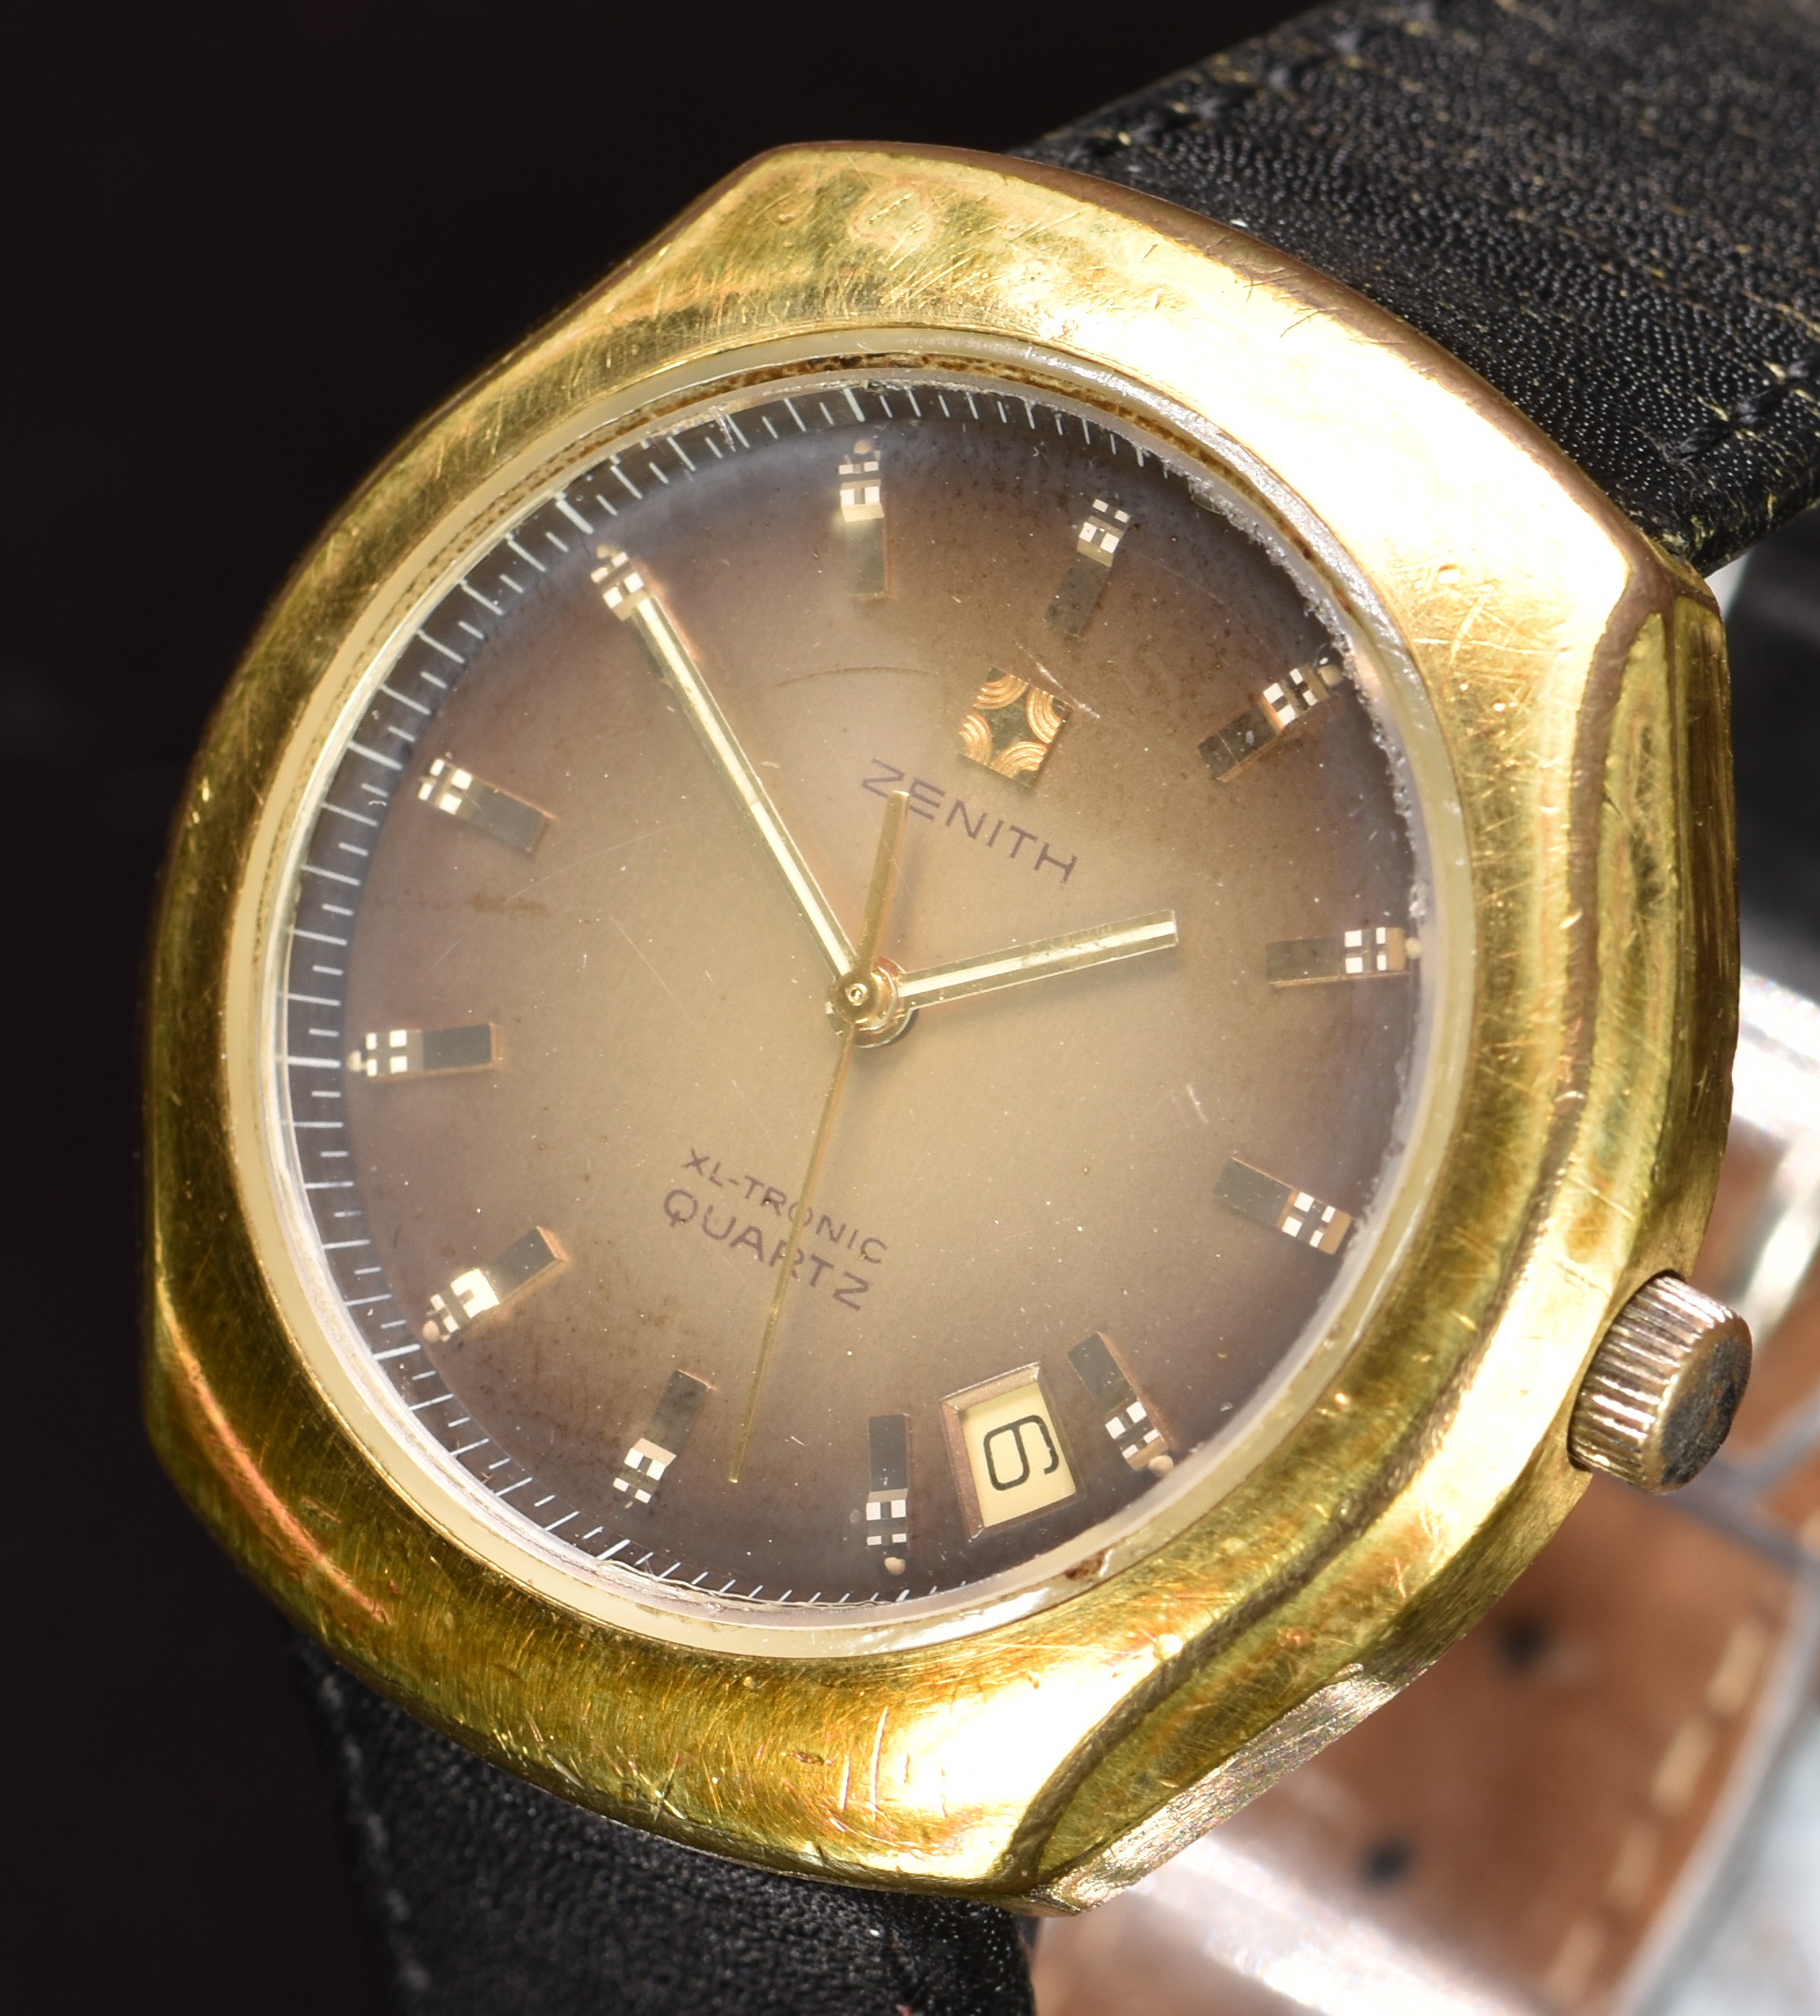 Zenith XL-Tronic gentleman's wristwatch ref. 20-0040-510 with date aperture, gold hands and hour - Image 2 of 5